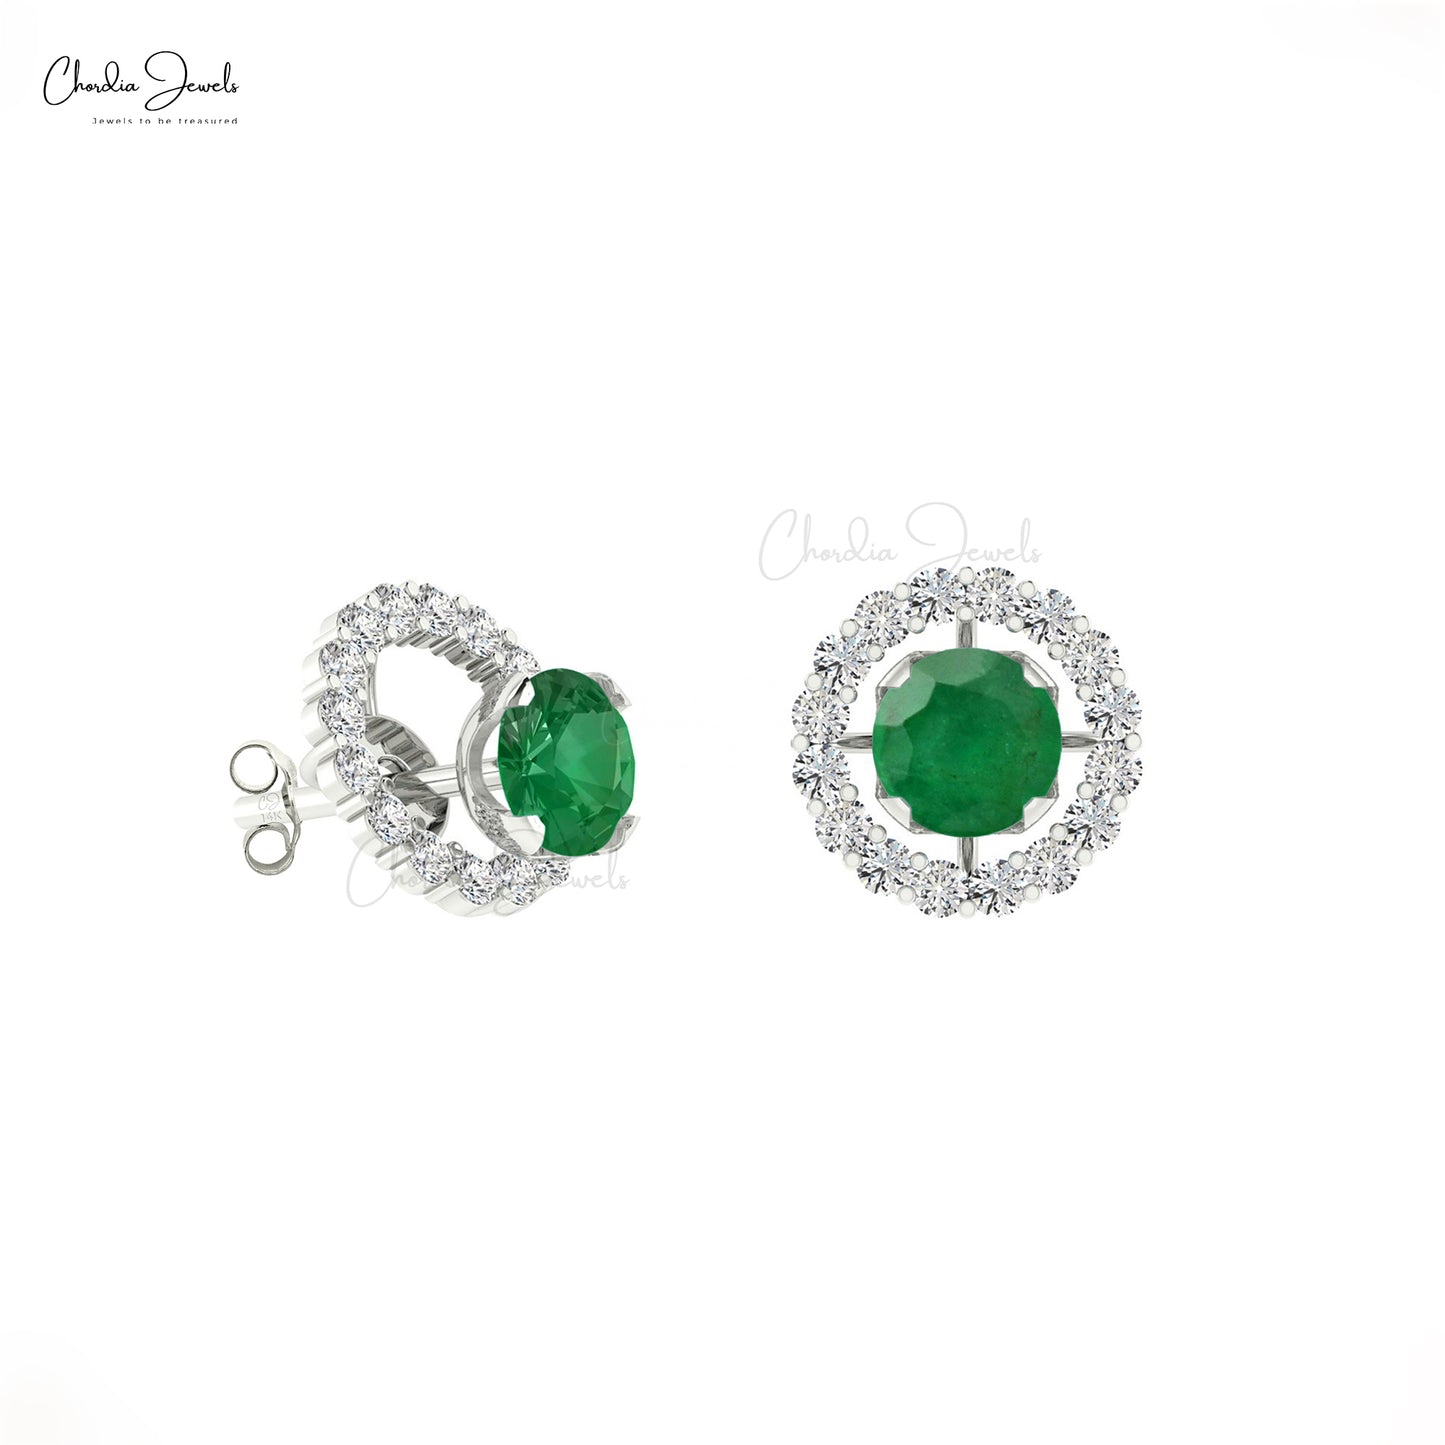 Adorn yourself with green emerald earrings.